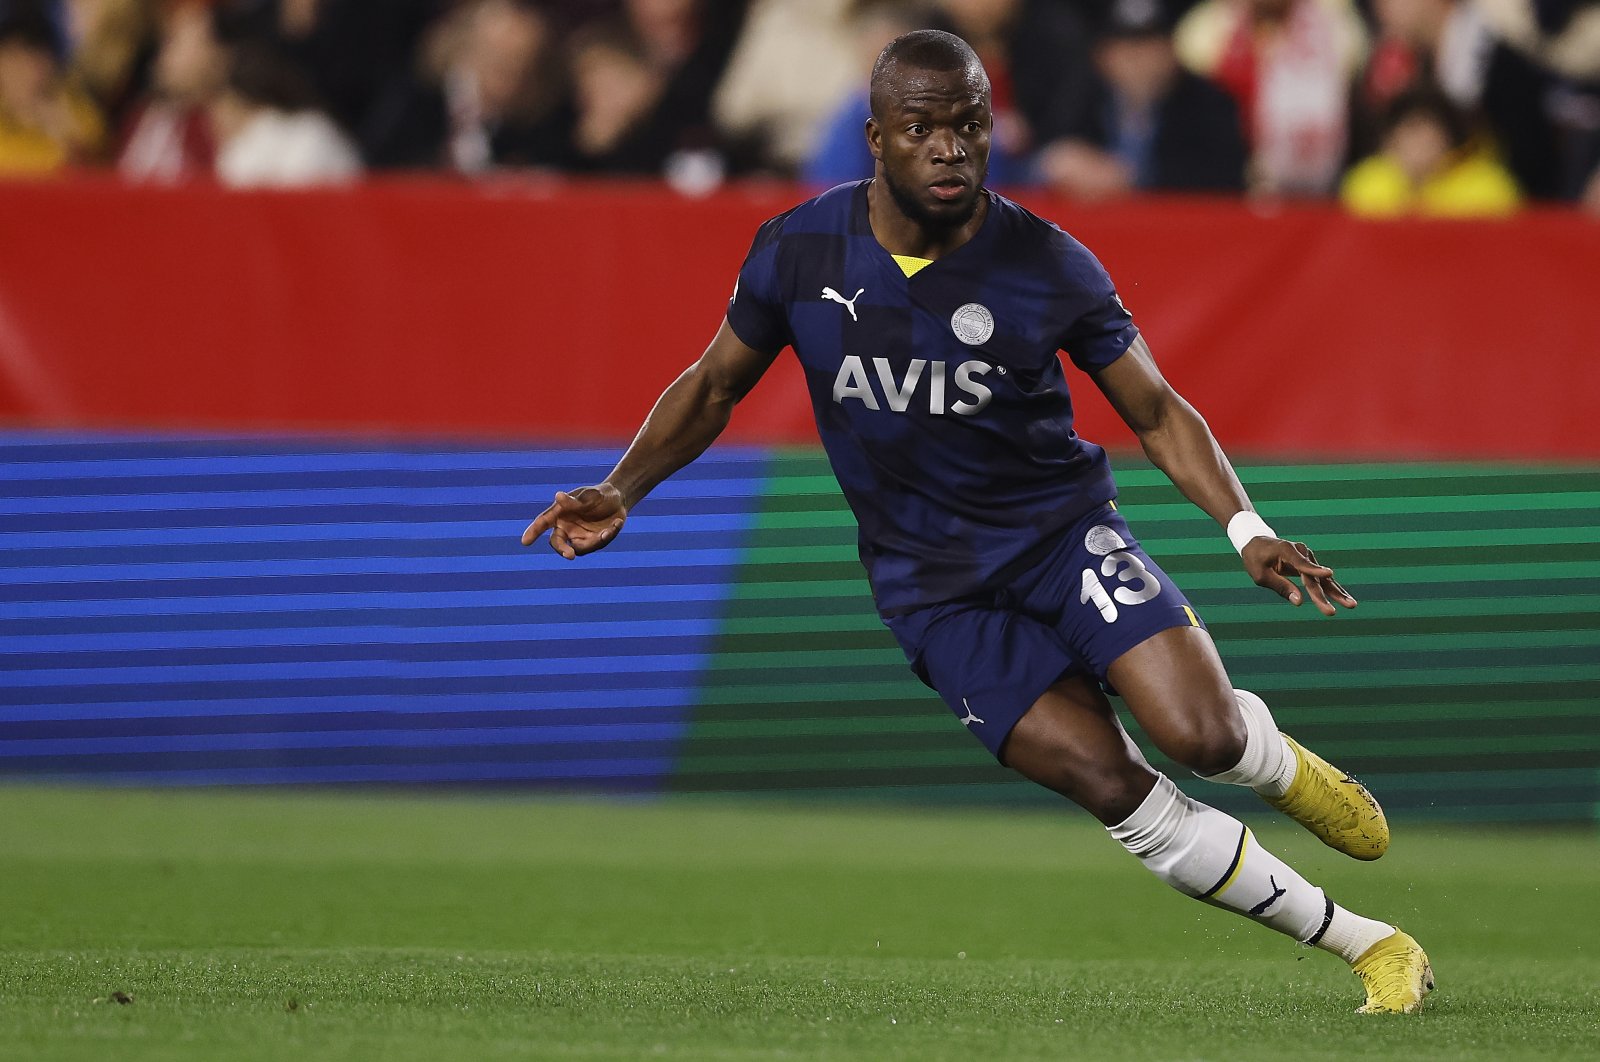 Fenerbahçe&#039;s Enner Valencia looks on during the UEFA Europa League round of 16 leg one match against Sevilla at Estadio Ramon Sanchez Pizjuan, Seville, Spain, March 9, 2023. (Getty Images Photo)